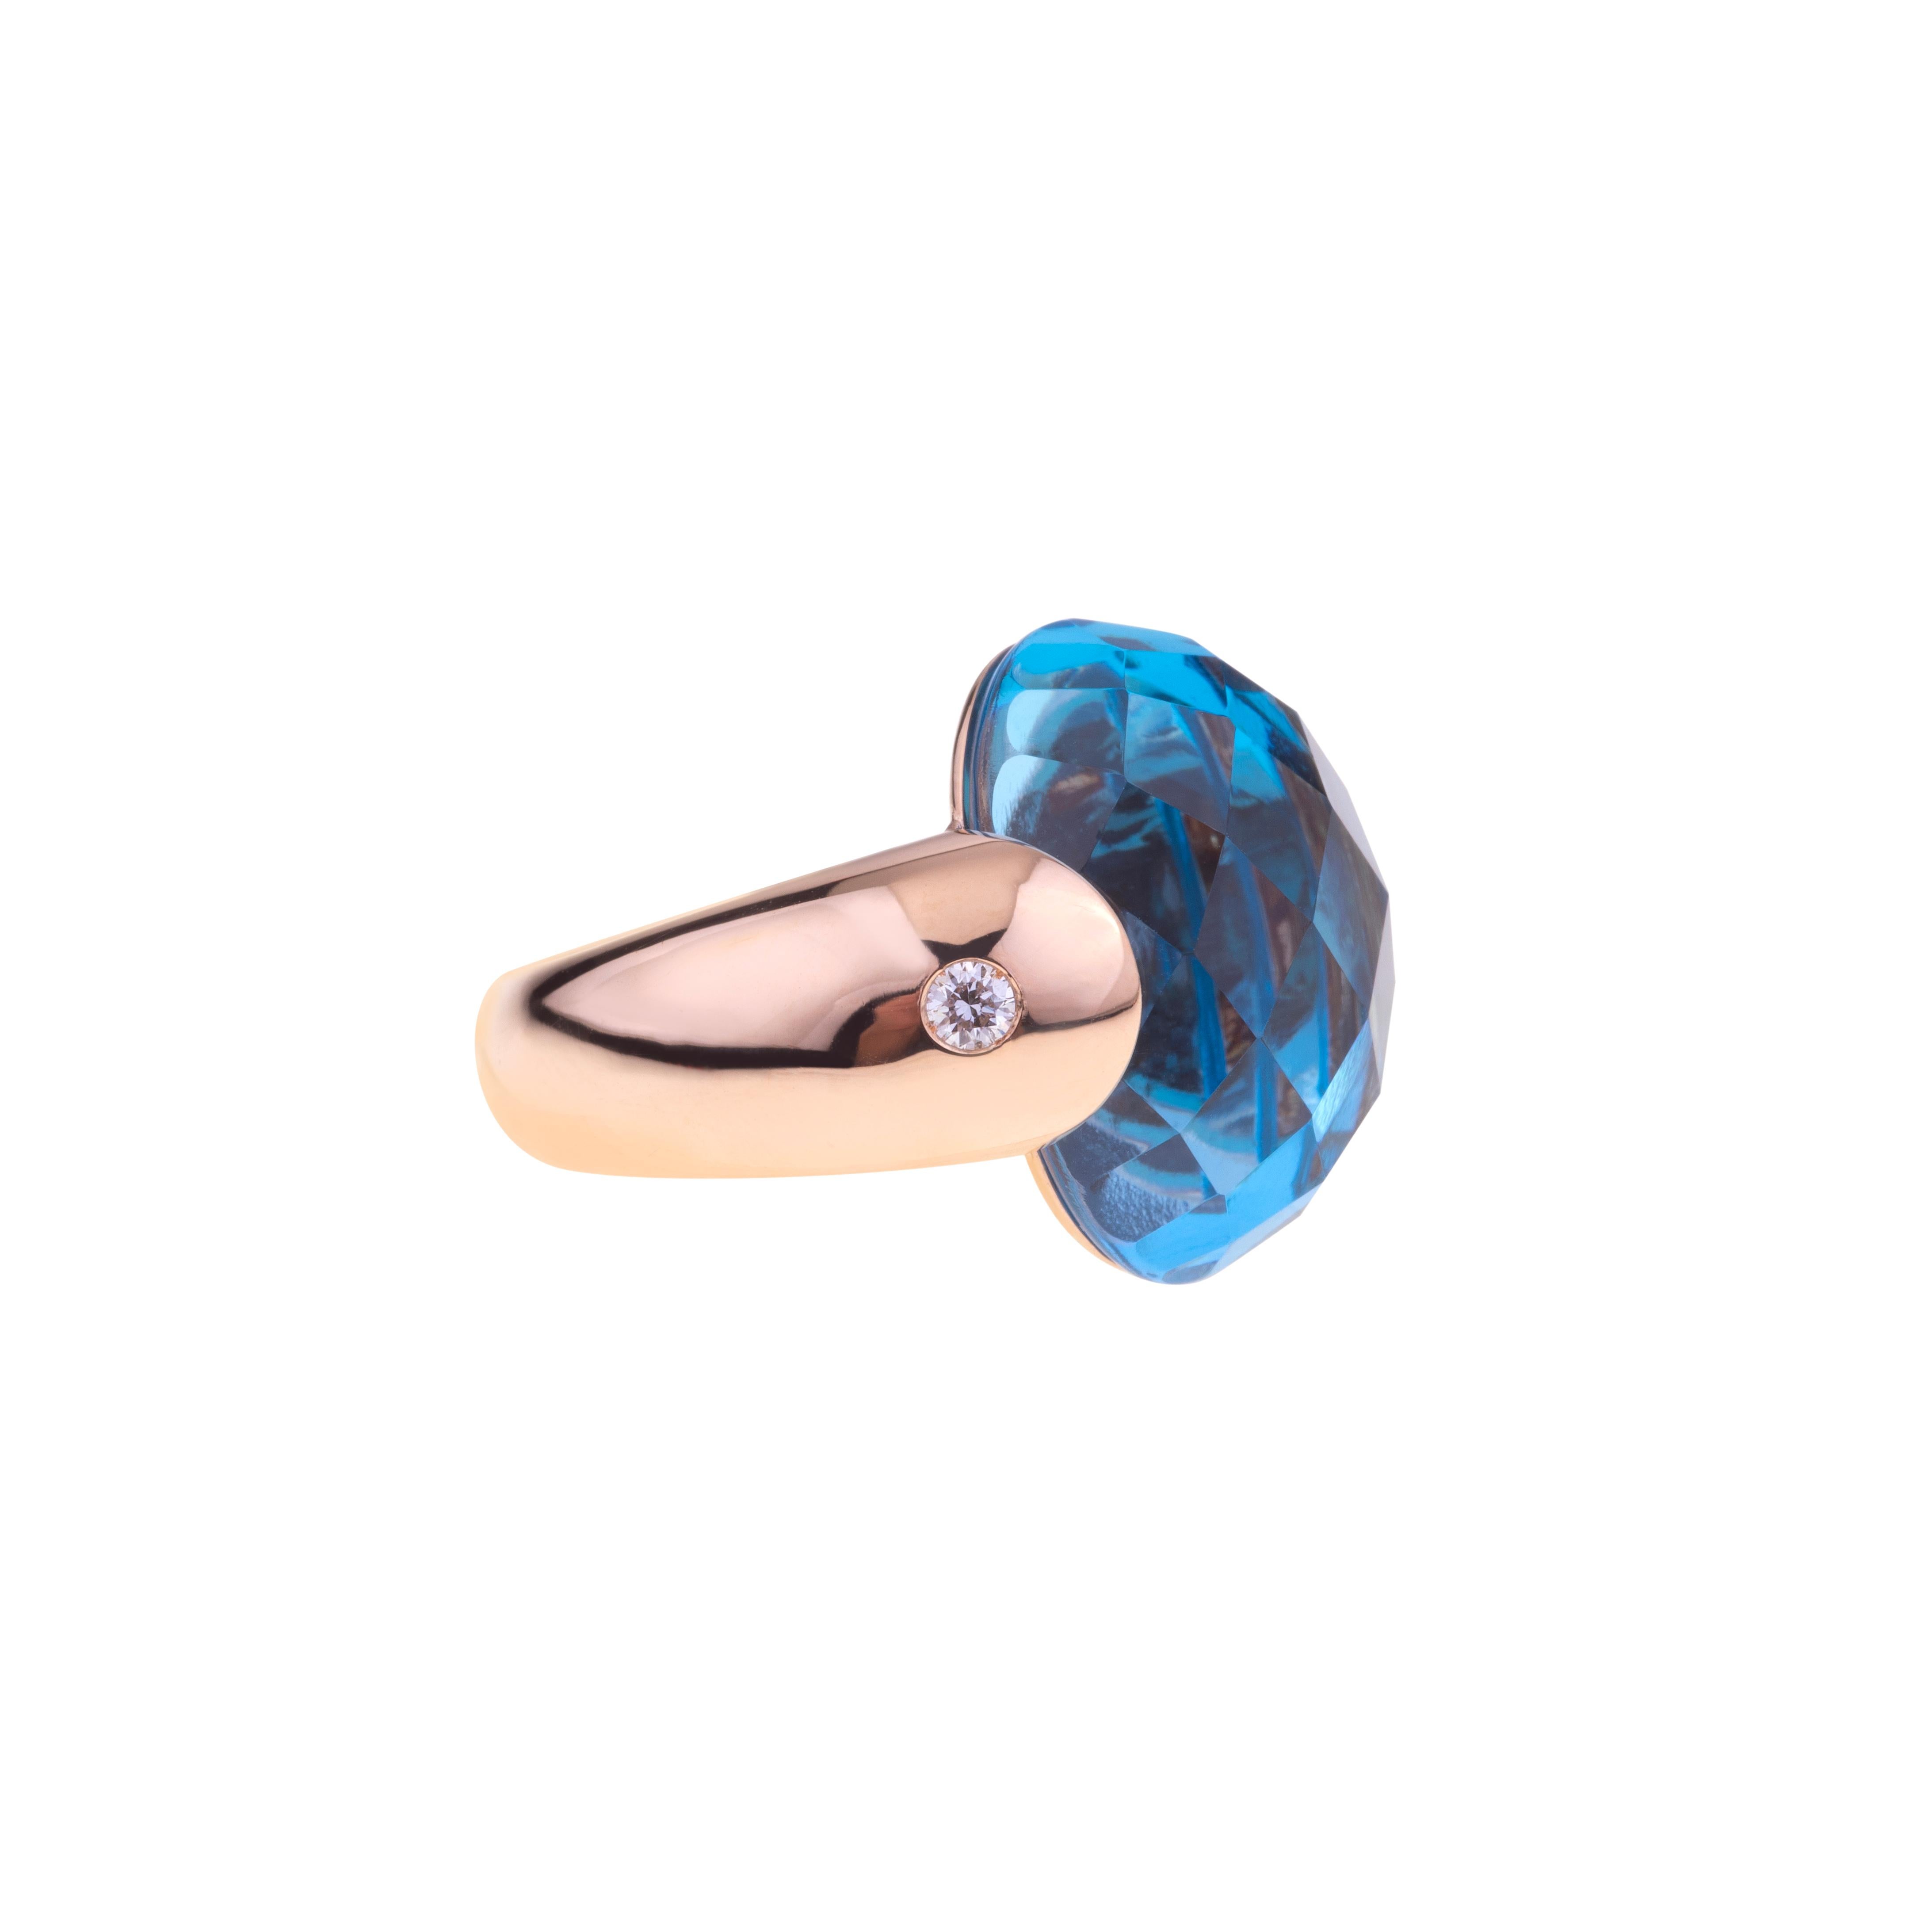 Embrace Collection by Angeletti. Rose Gold Ring With Blue Topaz and Diamonds.
Iconic Embrace Model, Designed and Manifactured in Rome.
On the side of the Blue Topaz (ct.18.06), two diamonds  ct. 0.16. Gold Weight is Around 8 to 11 gr. depending on